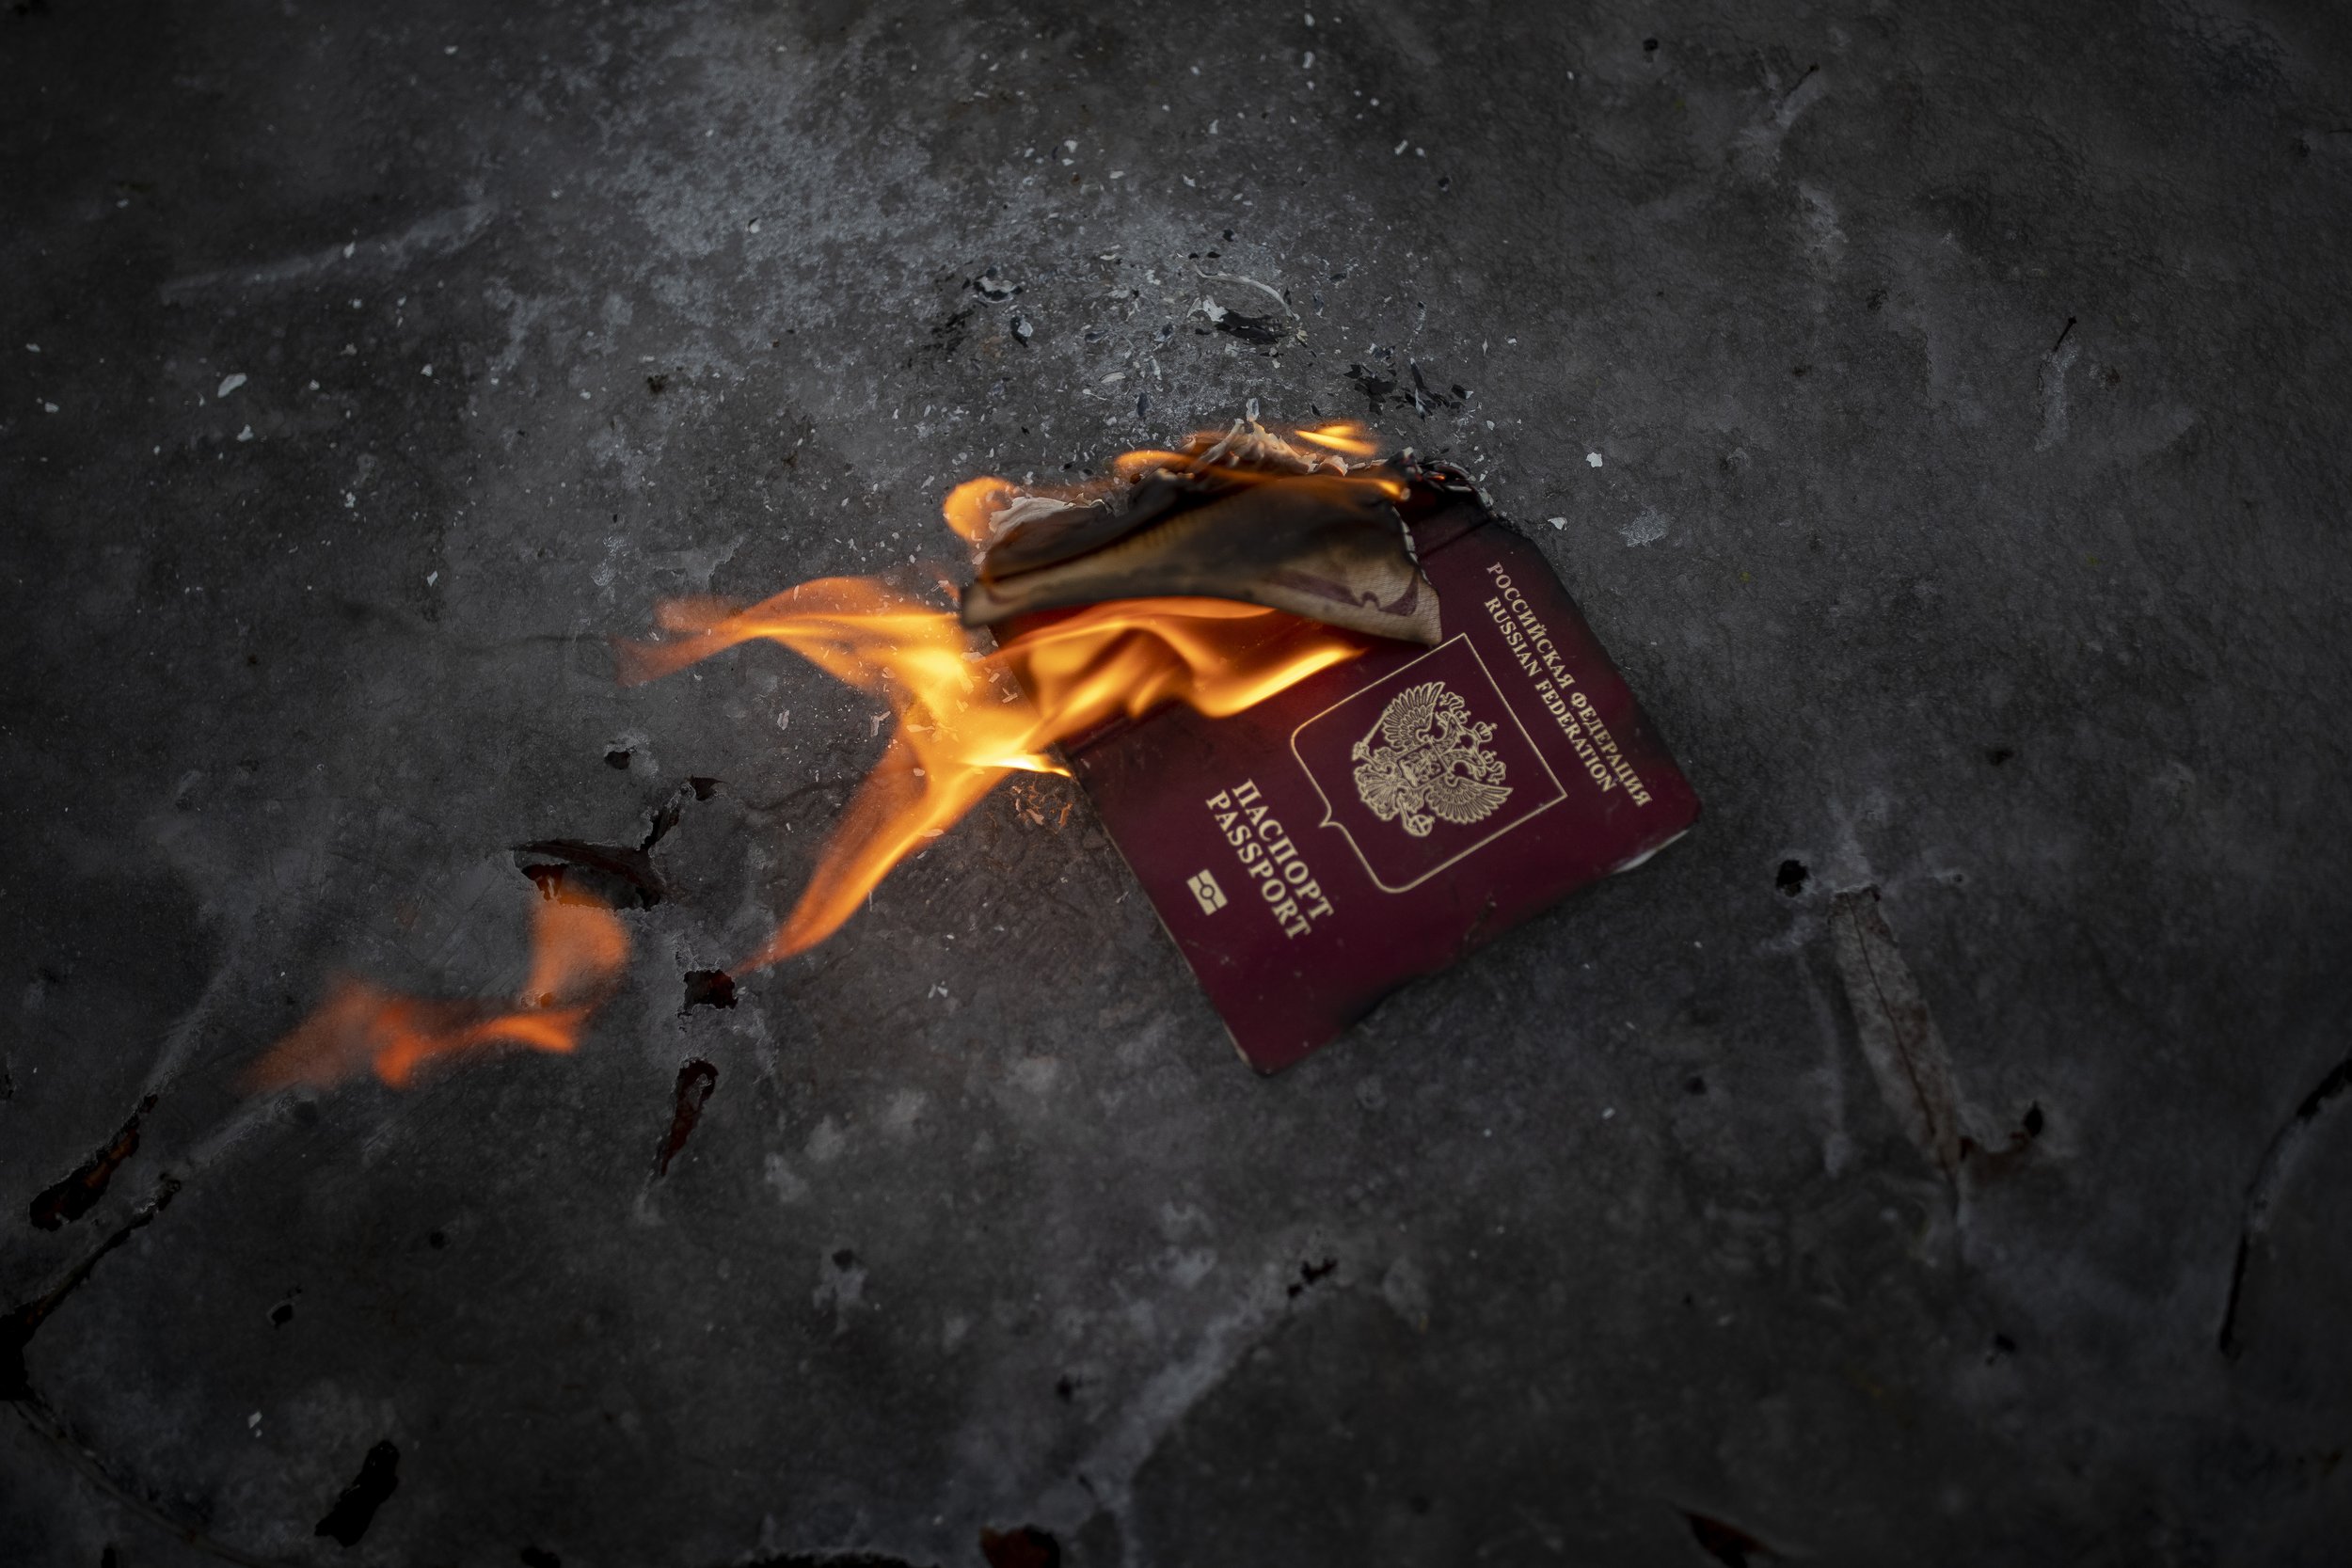  Protesters burn a Russian passport to demonstrates against Russian attacks in Ukraine in front of the Russian embassy in Vilnius, Lithuania, Thursday, Feb. 24, 2022. (AP Photo/Mindaugas Kulbis) 